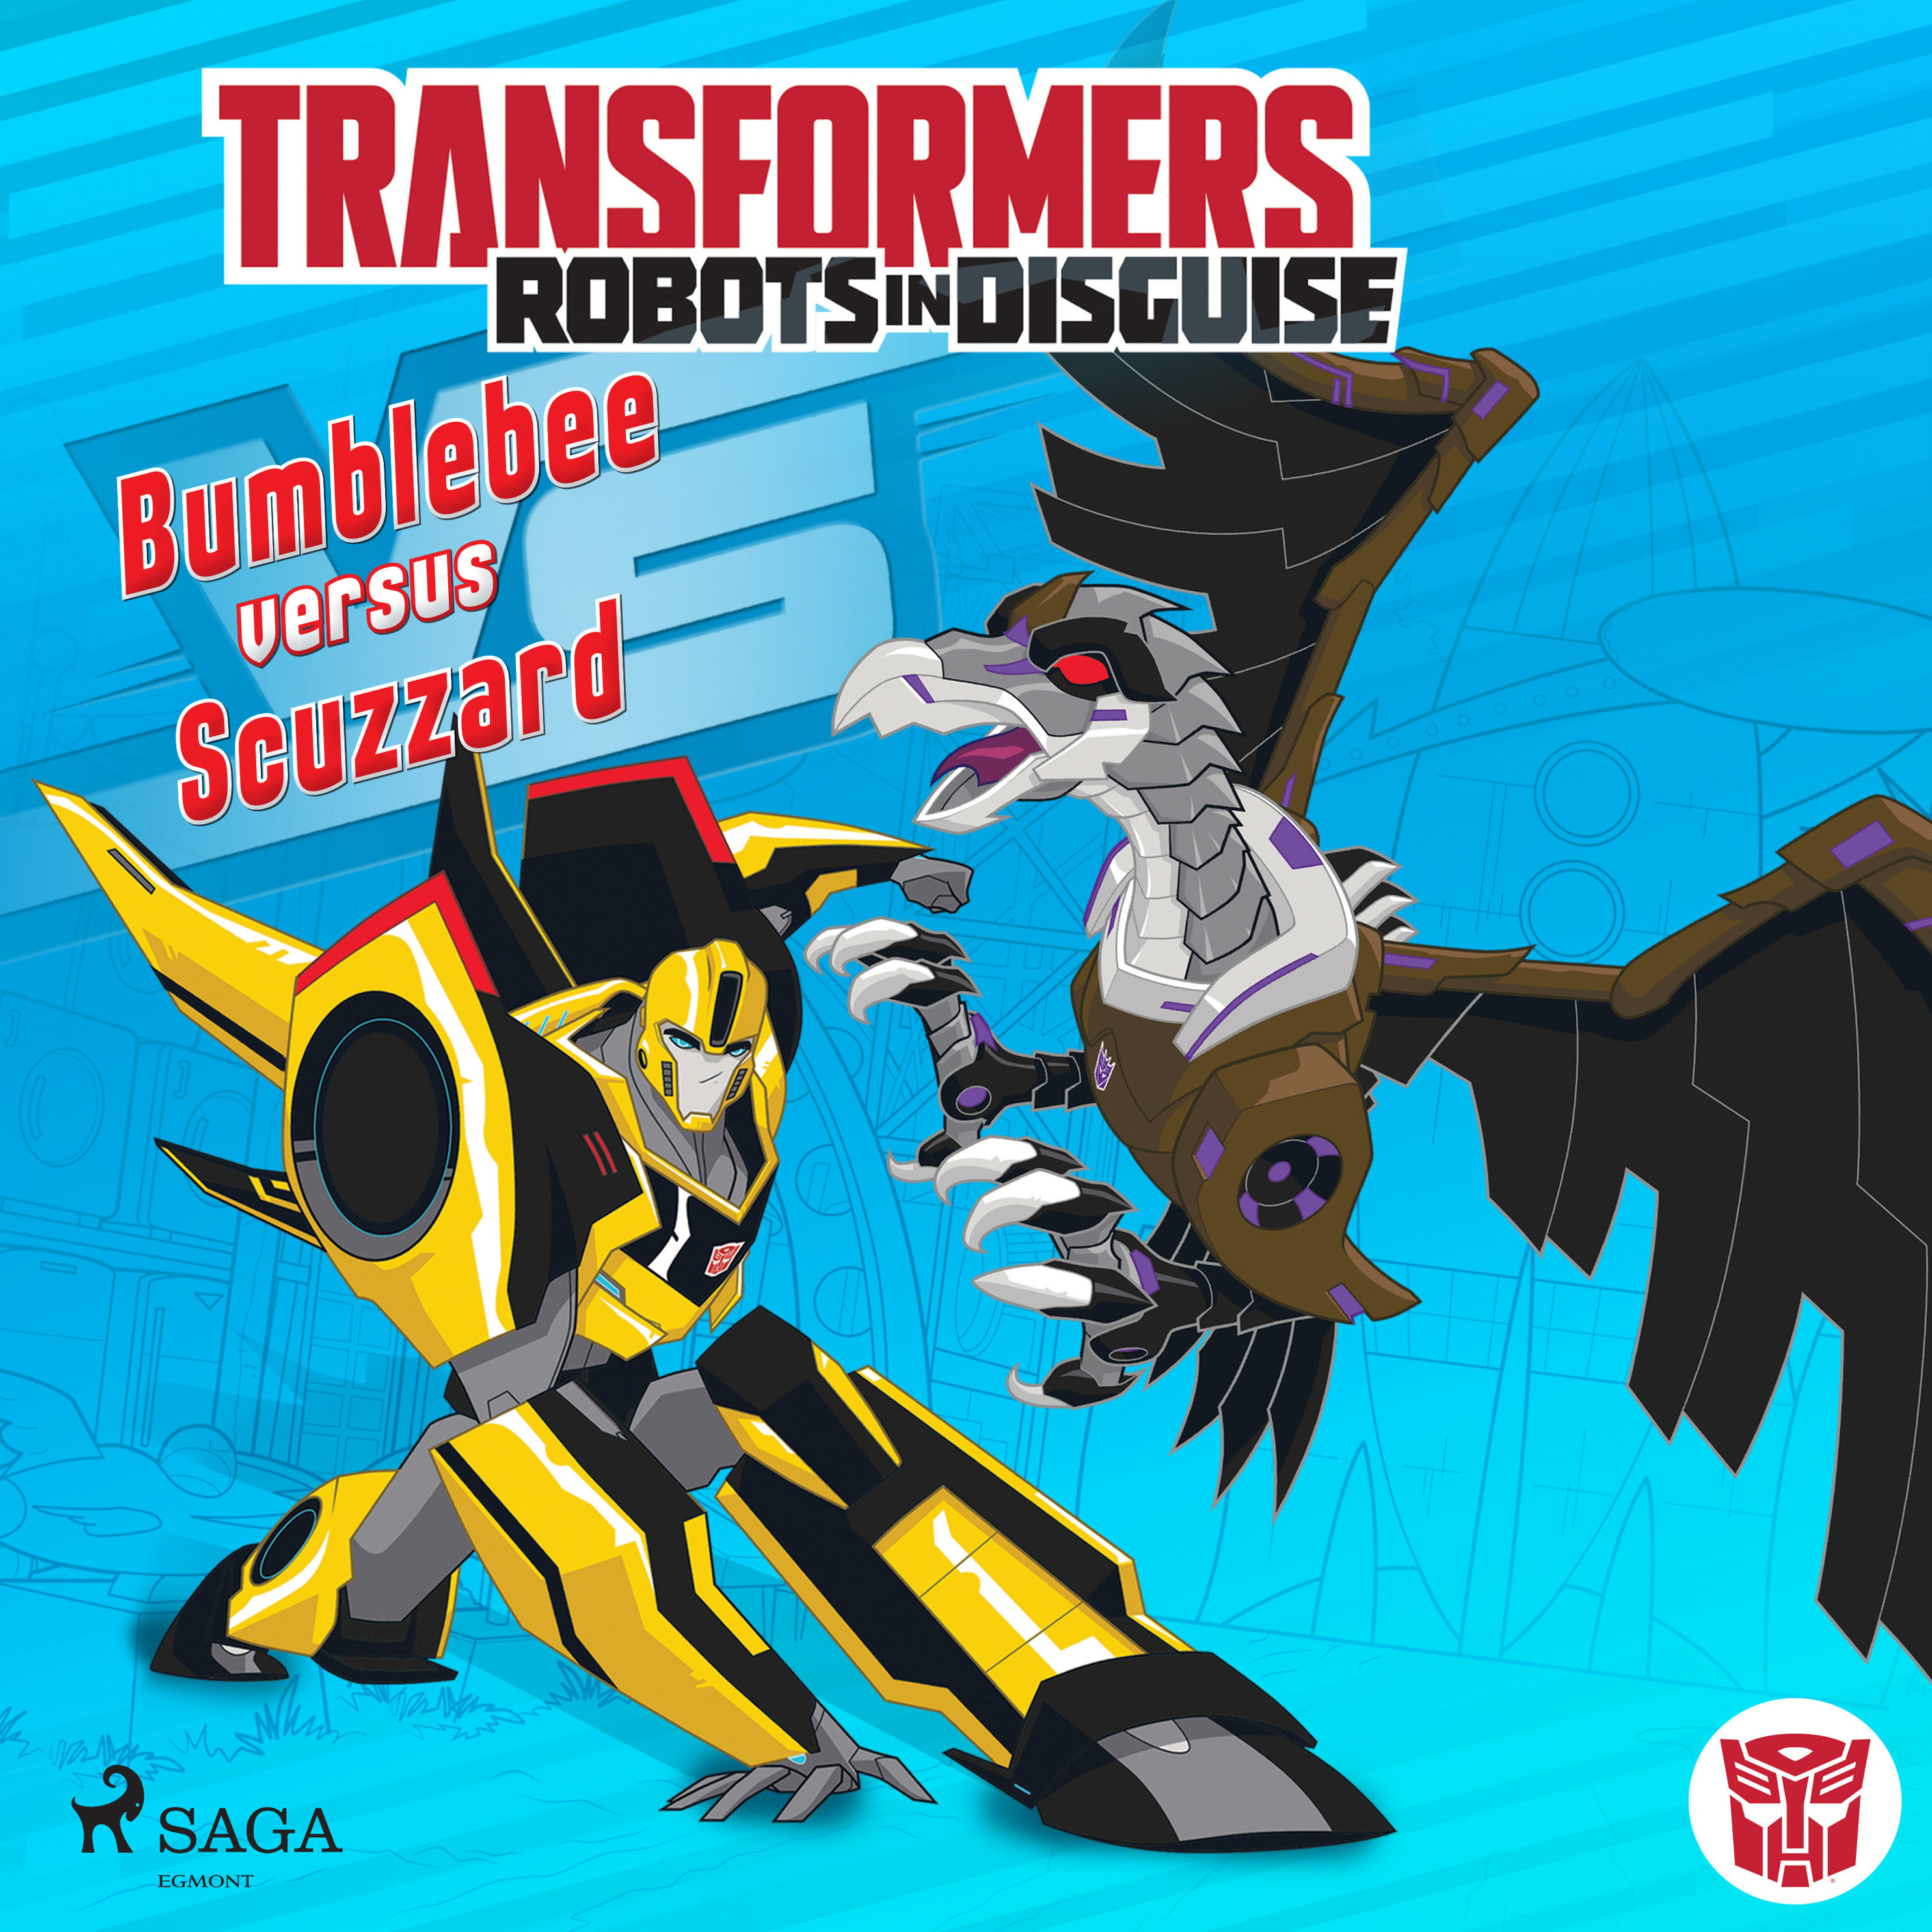 Transformers - Transformers - Robots in Disguise- Bumblebee versus Scuzzard  Hörbuch Download